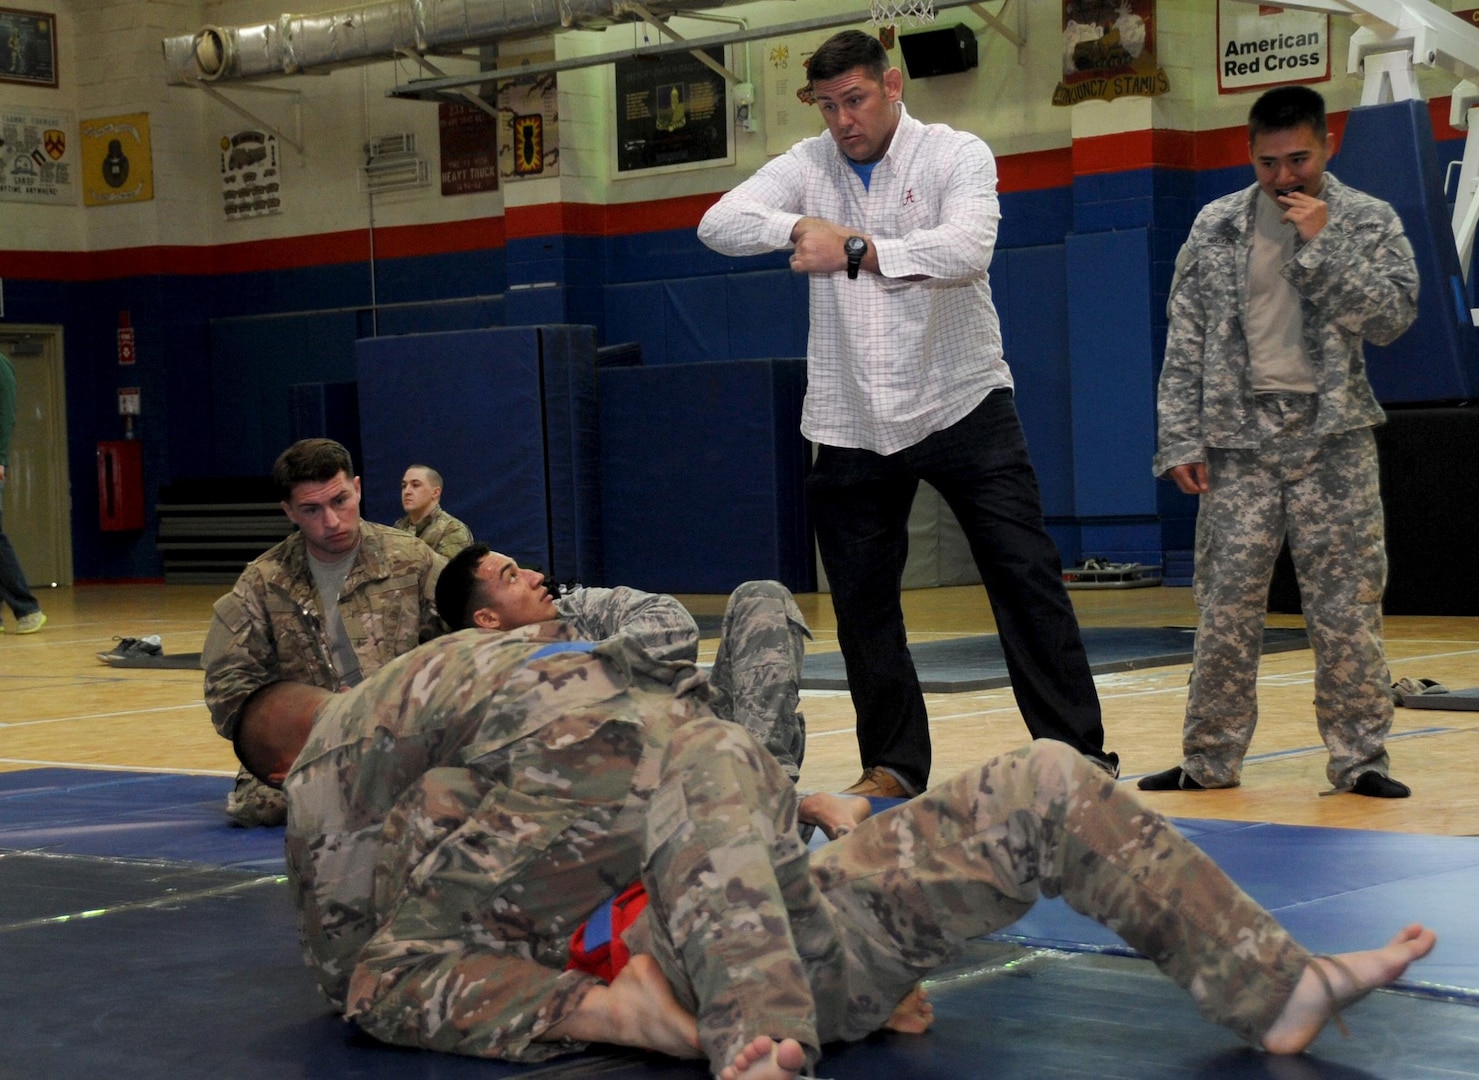 Master Sgt. Royce Kerbow, the 386th Air Expeditionary Wing command post superintendent, coaches his students during an Army combatives tournament match at an undisclosed location in Southwest Asia Jan. 22, 2017. Kerbow prepared his students with daily Brazilian jujitsu workouts. (U.S. Air Force photo/Tech. Sgt. Kenneth McCann)